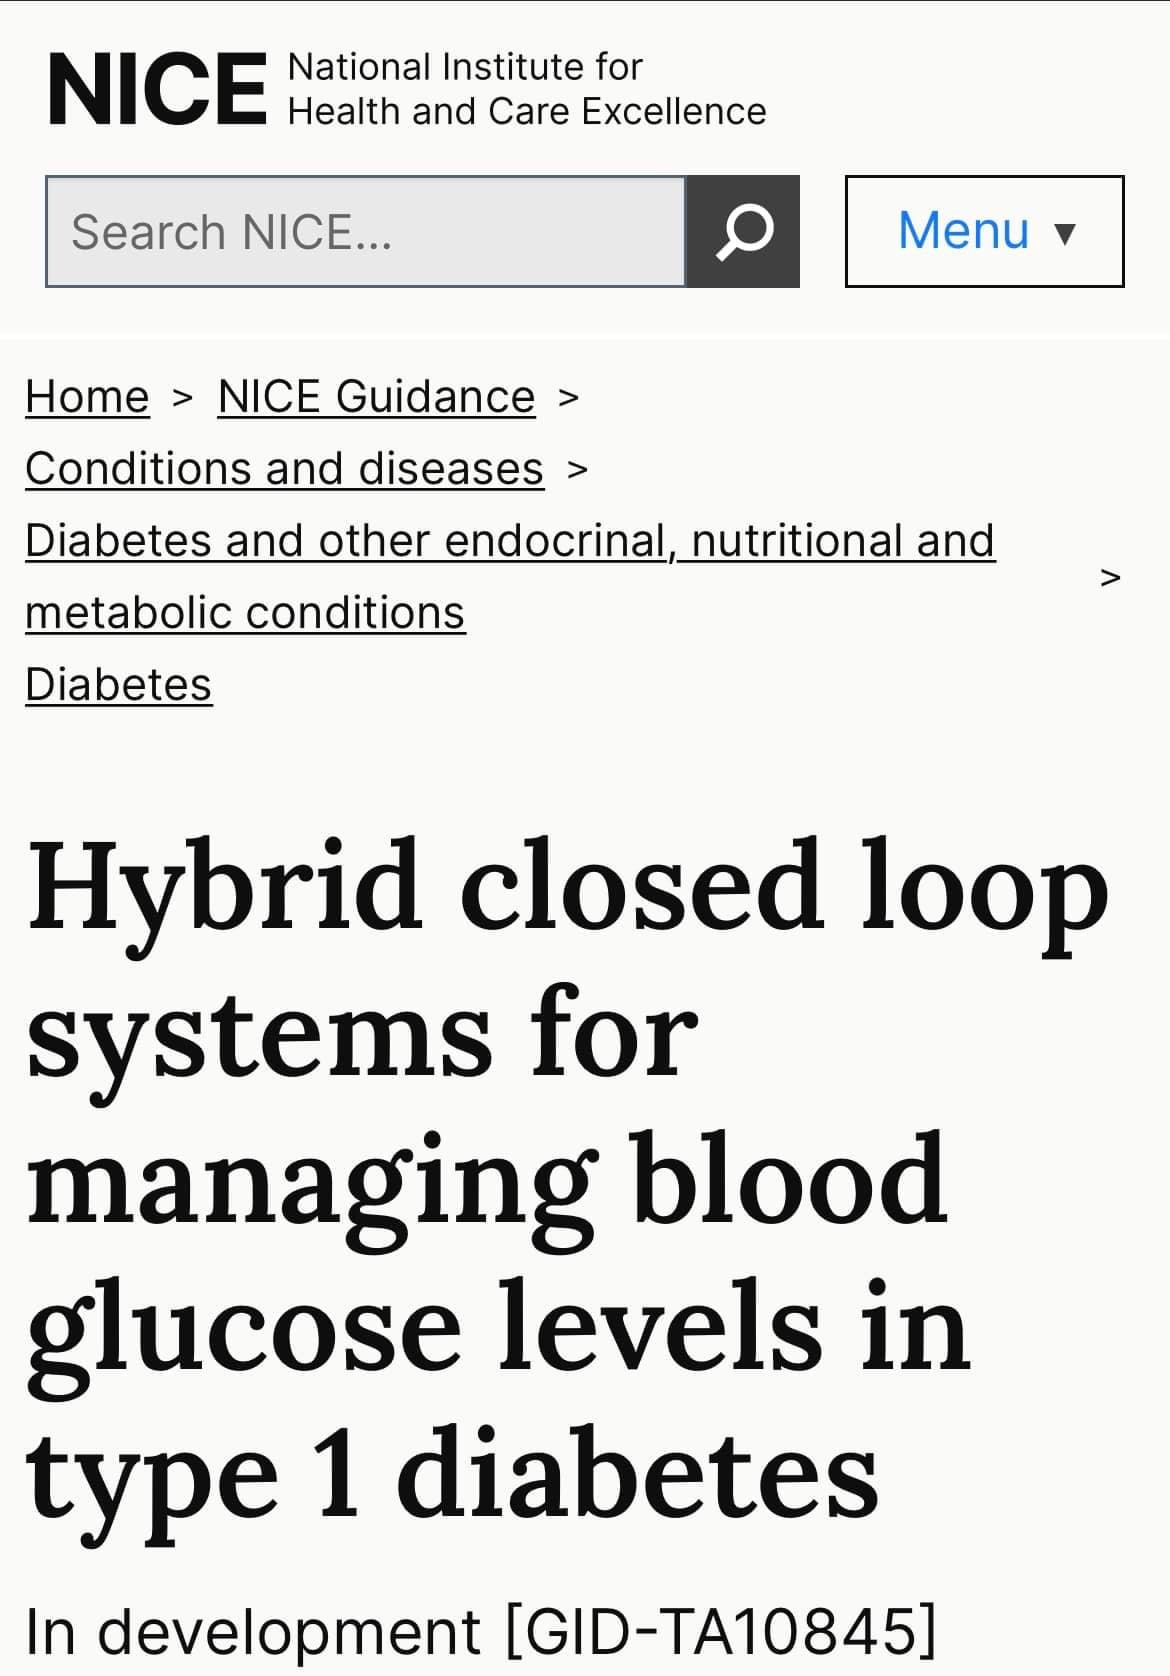 *! YOUR COMMUNITY NEEDS YOU !* Have your say on NICE's guidance on using hybrid closed loop systems for managing BG levels.